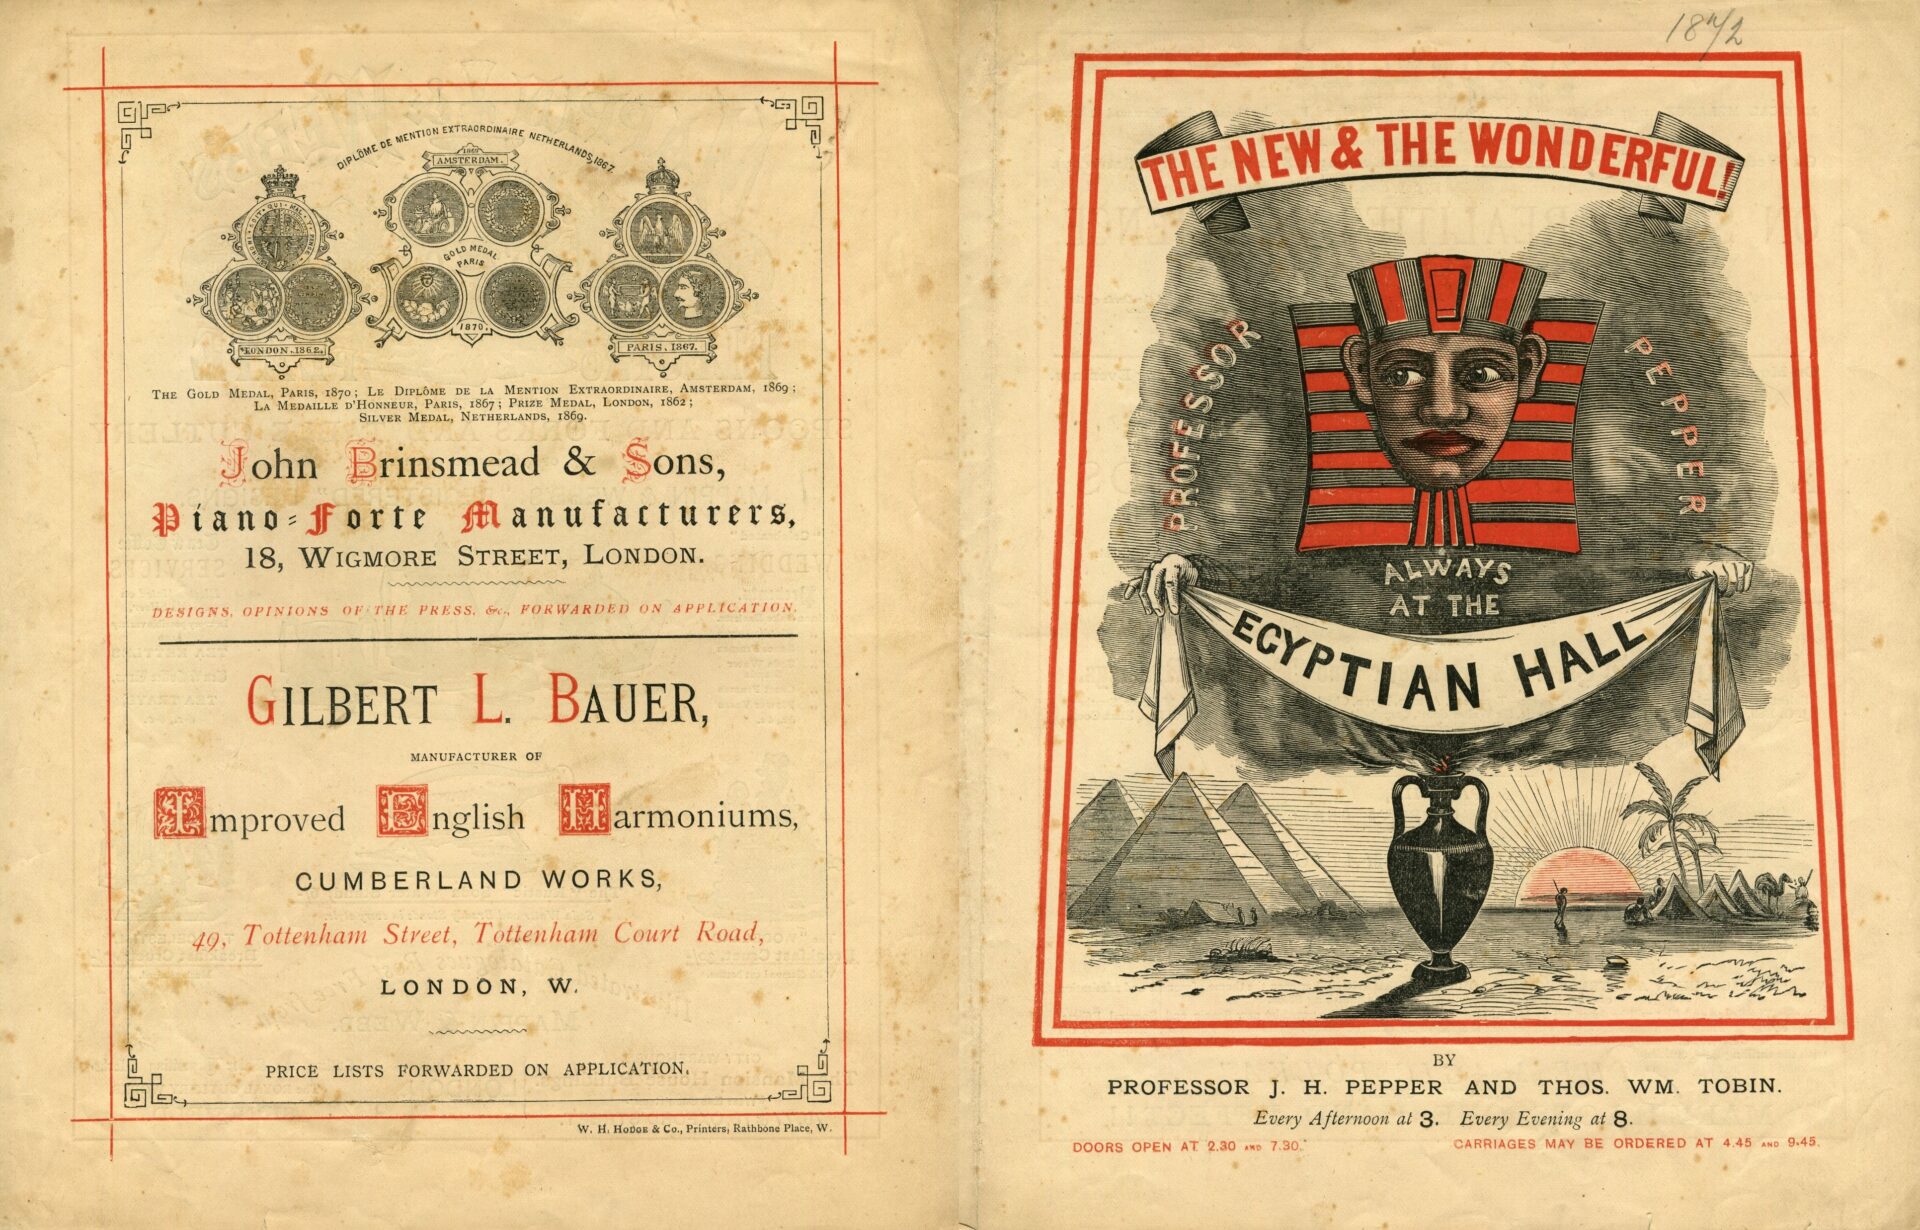 Programme for Pepper and Tobin at the Egyptian Hall, 1872